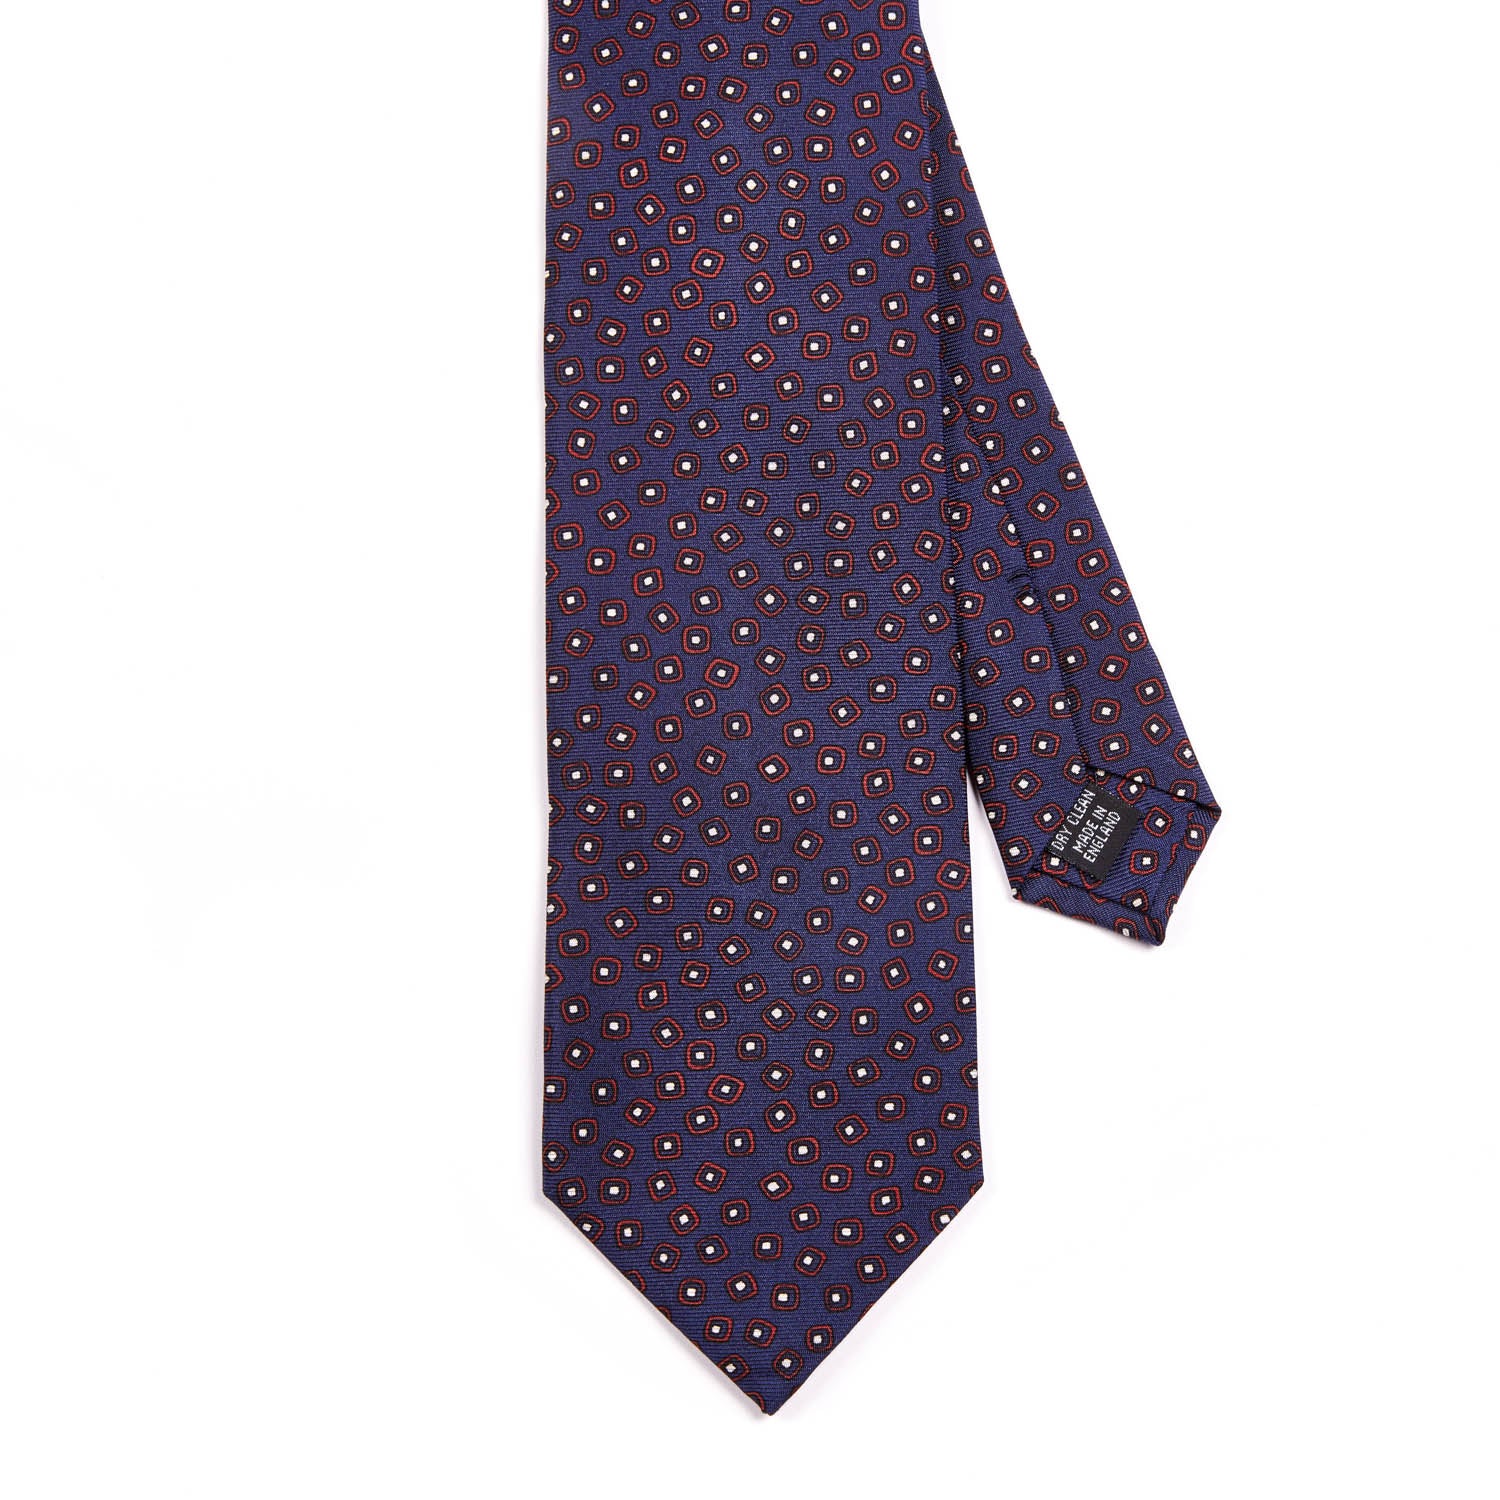 A Sovereign Grade Navy/Red Eton Printed Silk Tie, 150cm from KirbyAllison.com on a white background.